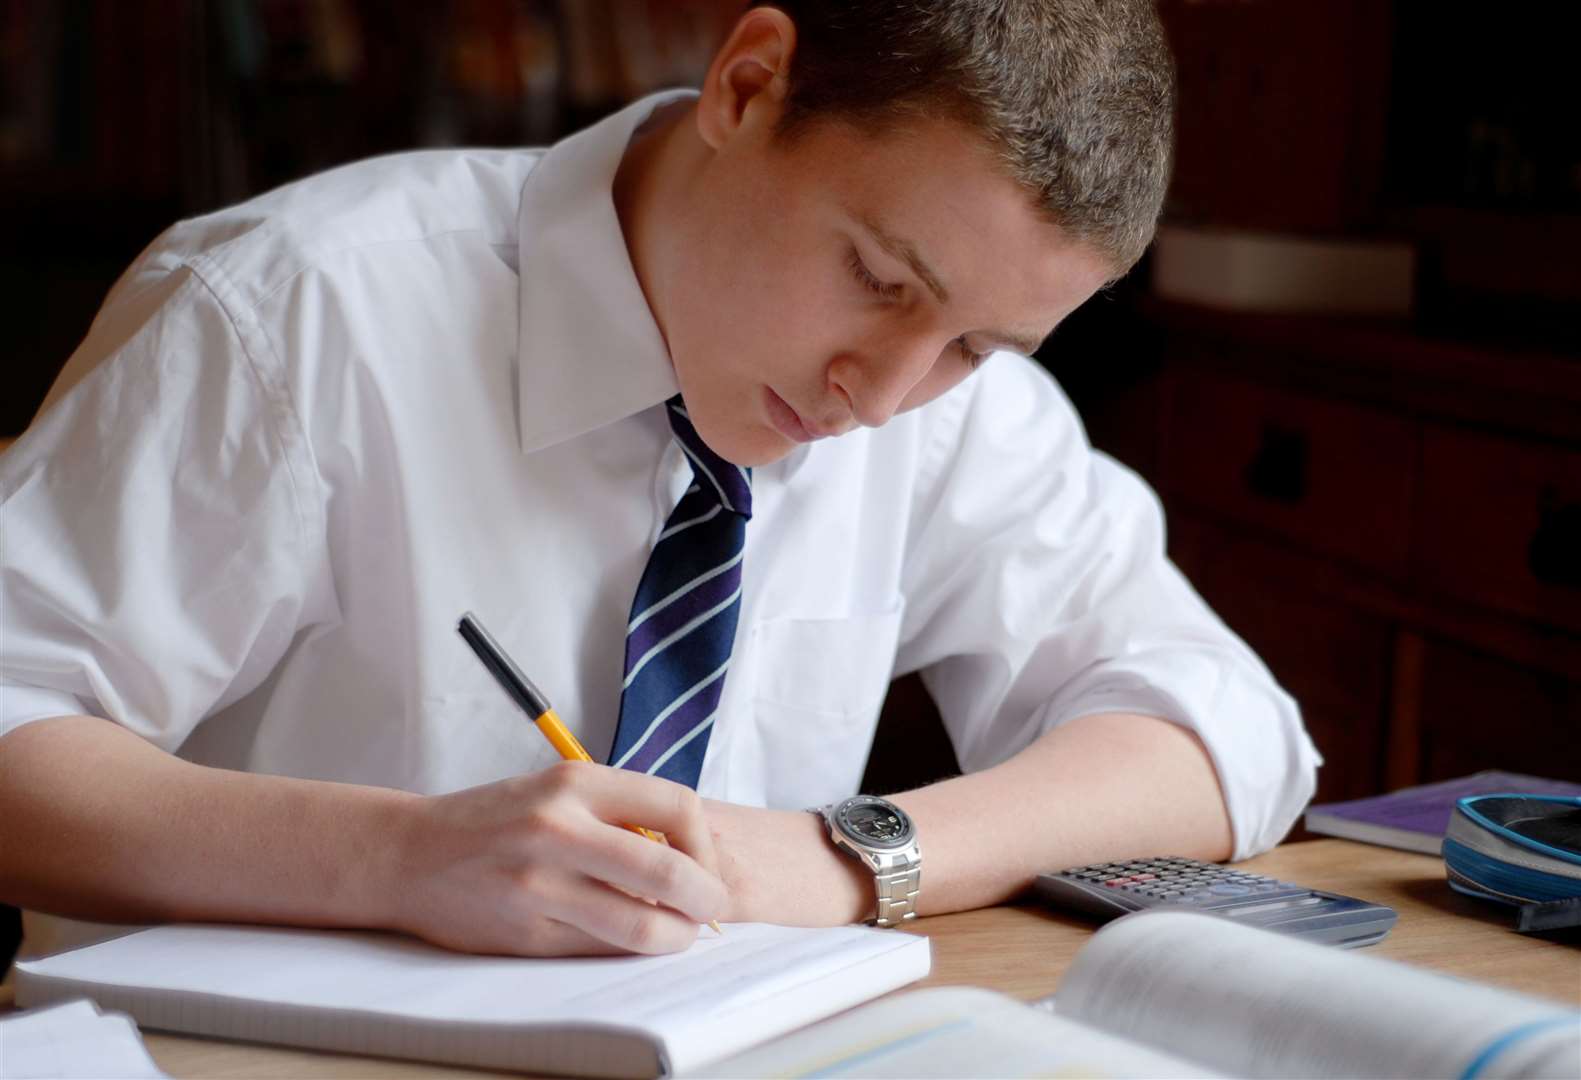 Exam istock images showing students revising and studying for exams.